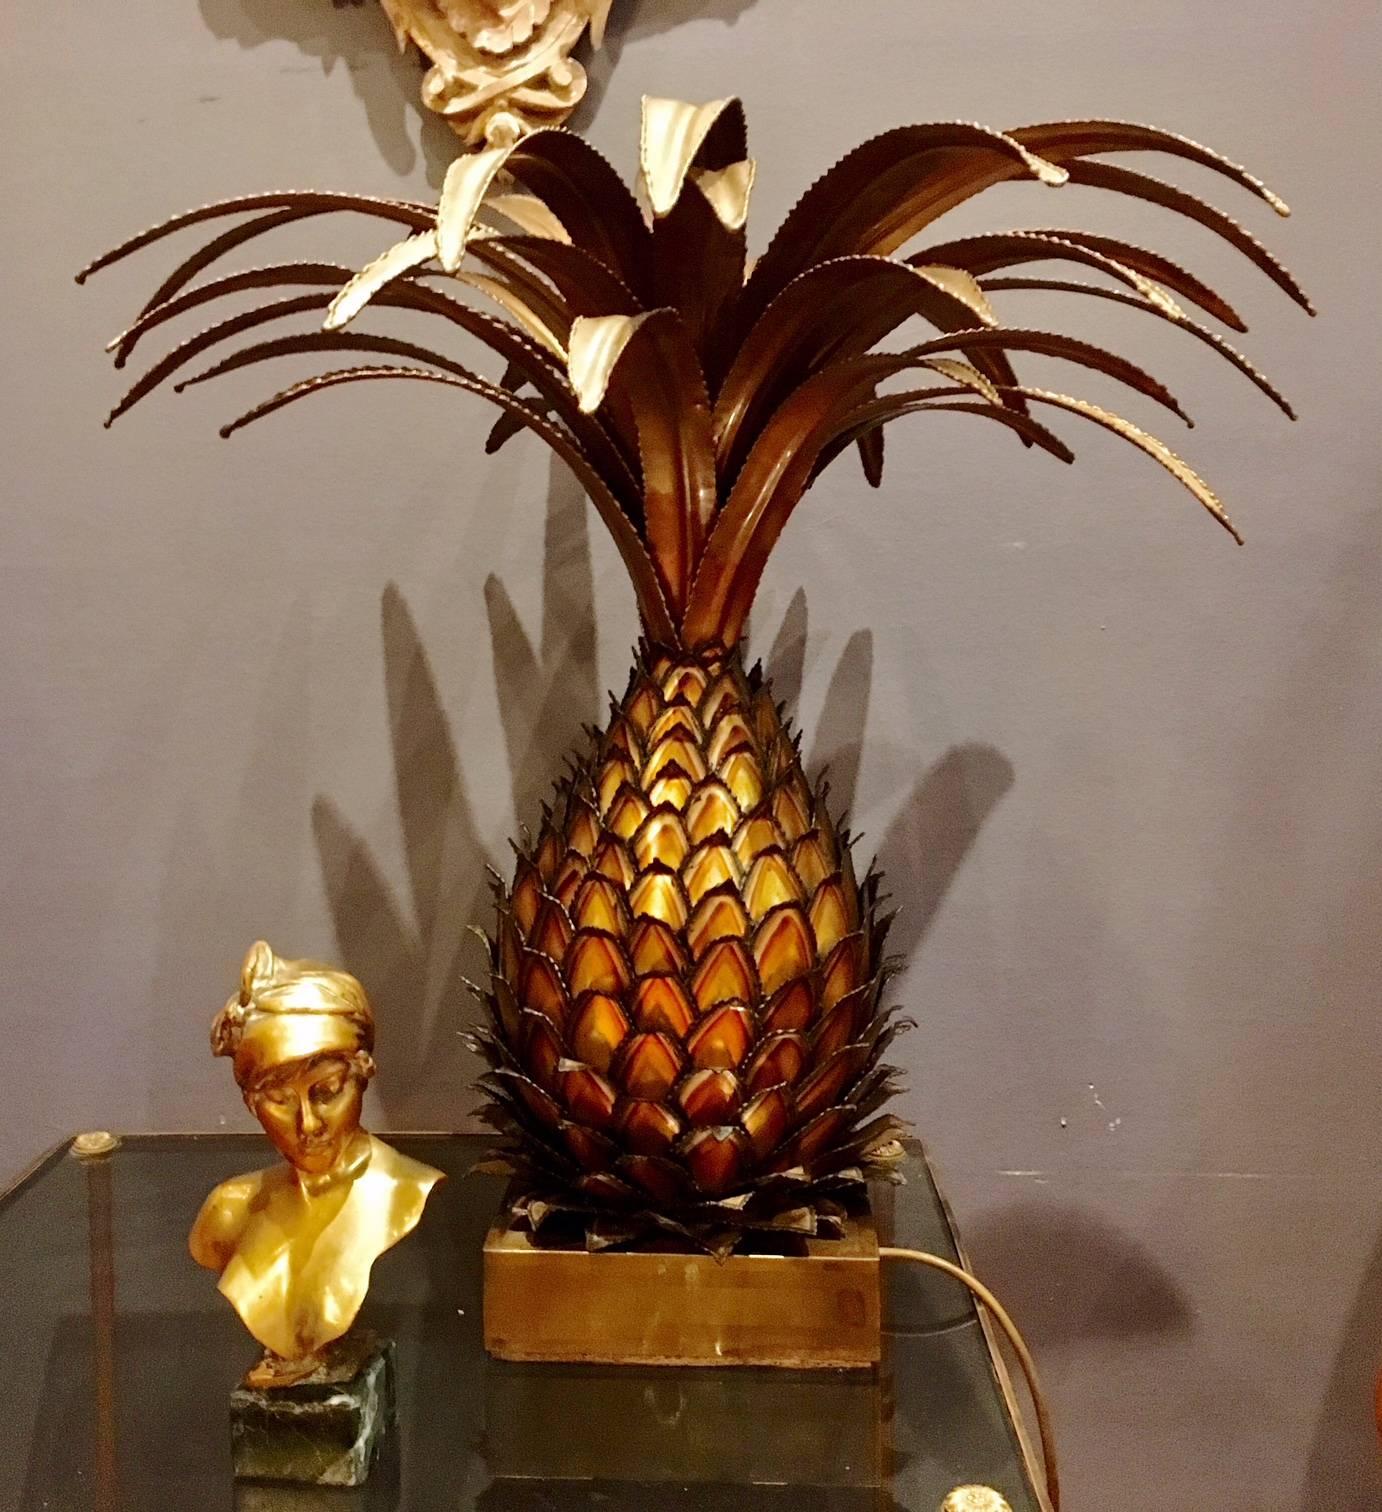 Large Maison Jansen brass pineapple table lamp designed in France in the 1970s. In the Hollywood Regency style. The lamp is in a good condition. Measures: 59 cm in height, 60 cm in width at the widest point. The square base is 19.5 x 19.5 cm.